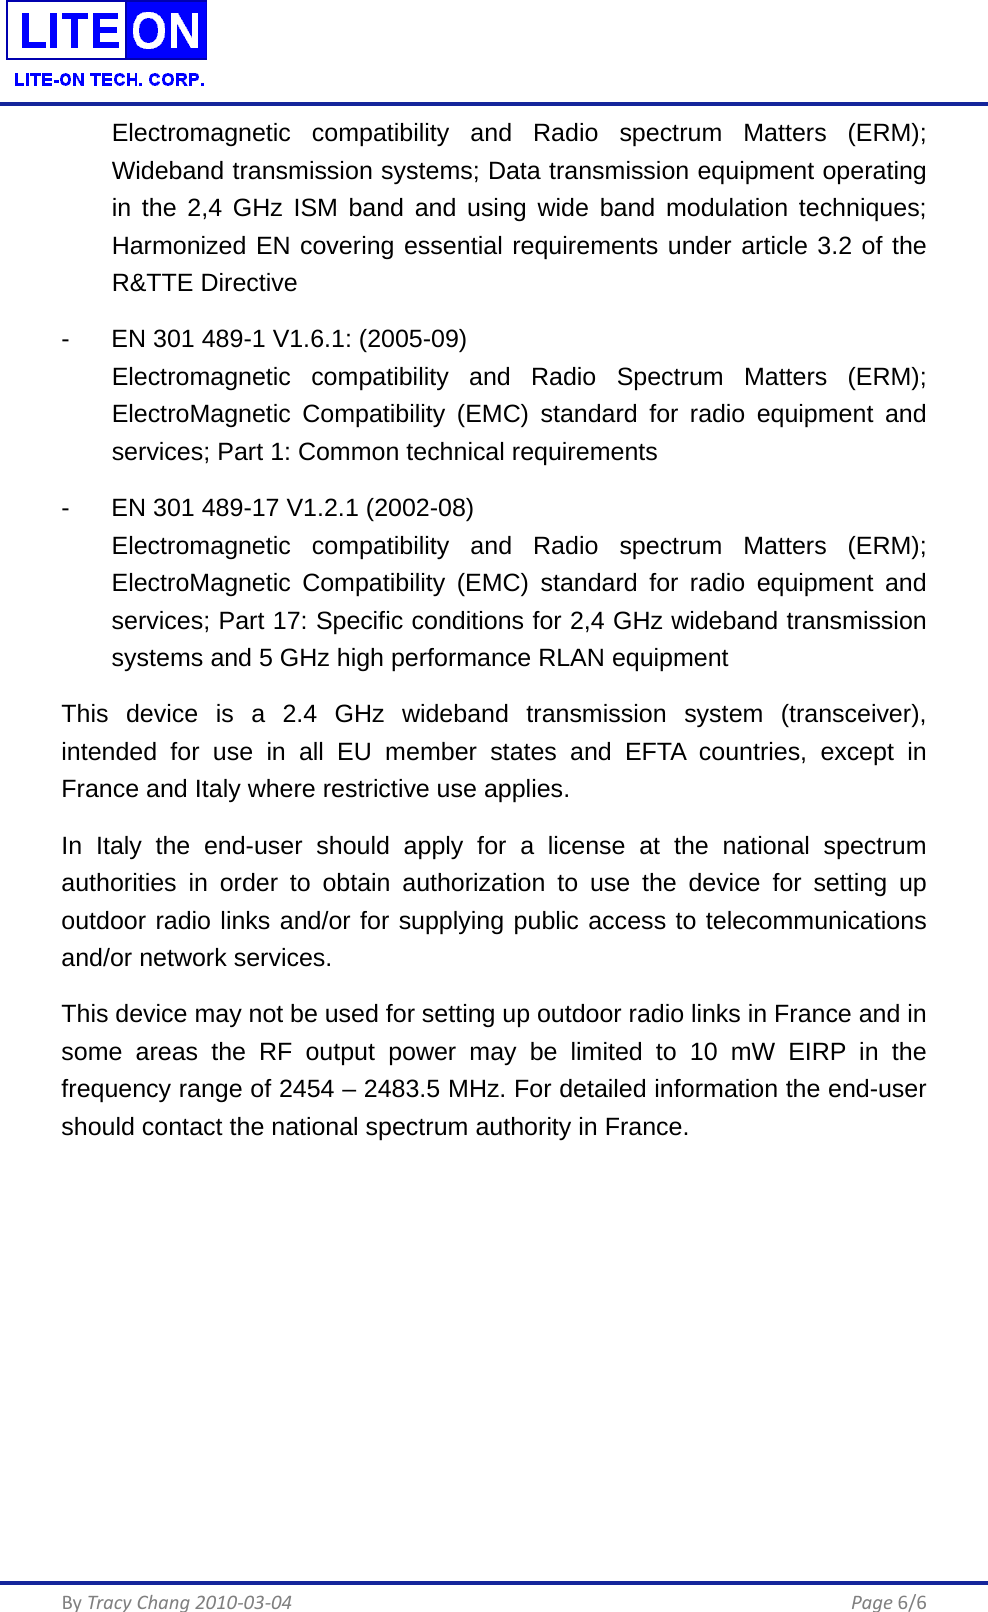  By Tracy Chang 2010-03-04      Page 6/6 Electromagnetic compatibility and Radio spectrum Matters (ERM); Wideband transmission systems; Data transmission equipment operating in the 2,4 GHz ISM band and using wide band modulation techniques; Harmonized EN covering essential requirements under article 3.2 of the R&amp;TTE Directive -  EN 301 489-1 V1.6.1: (2005-09) Electromagnetic compatibility and Radio Spectrum Matters (ERM); ElectroMagnetic Compatibility (EMC) standard for radio equipment and services; Part 1: Common technical requirements -  EN 301 489-17 V1.2.1 (2002-08)    Electromagnetic compatibility and Radio spectrum Matters (ERM); ElectroMagnetic Compatibility (EMC) standard for radio equipment and services; Part 17: Specific conditions for 2,4 GHz wideband transmission systems and 5 GHz high performance RLAN equipment This device is a 2.4 GHz wideband transmission system (transceiver), intended for use in all EU member states and EFTA countries, except in France and Italy where restrictive use applies. In Italy the end-user should apply for a license at the national spectrum authorities in order to obtain authorization to use the device for setting up outdoor radio links and/or for supplying public access to telecommunications and/or network services. This device may not be used for setting up outdoor radio links in France and in some areas the RF output power may be limited to 10 mW EIRP in the frequency range of 2454 – 2483.5 MHz. For detailed information the end-user should contact the national spectrum authority in France. 